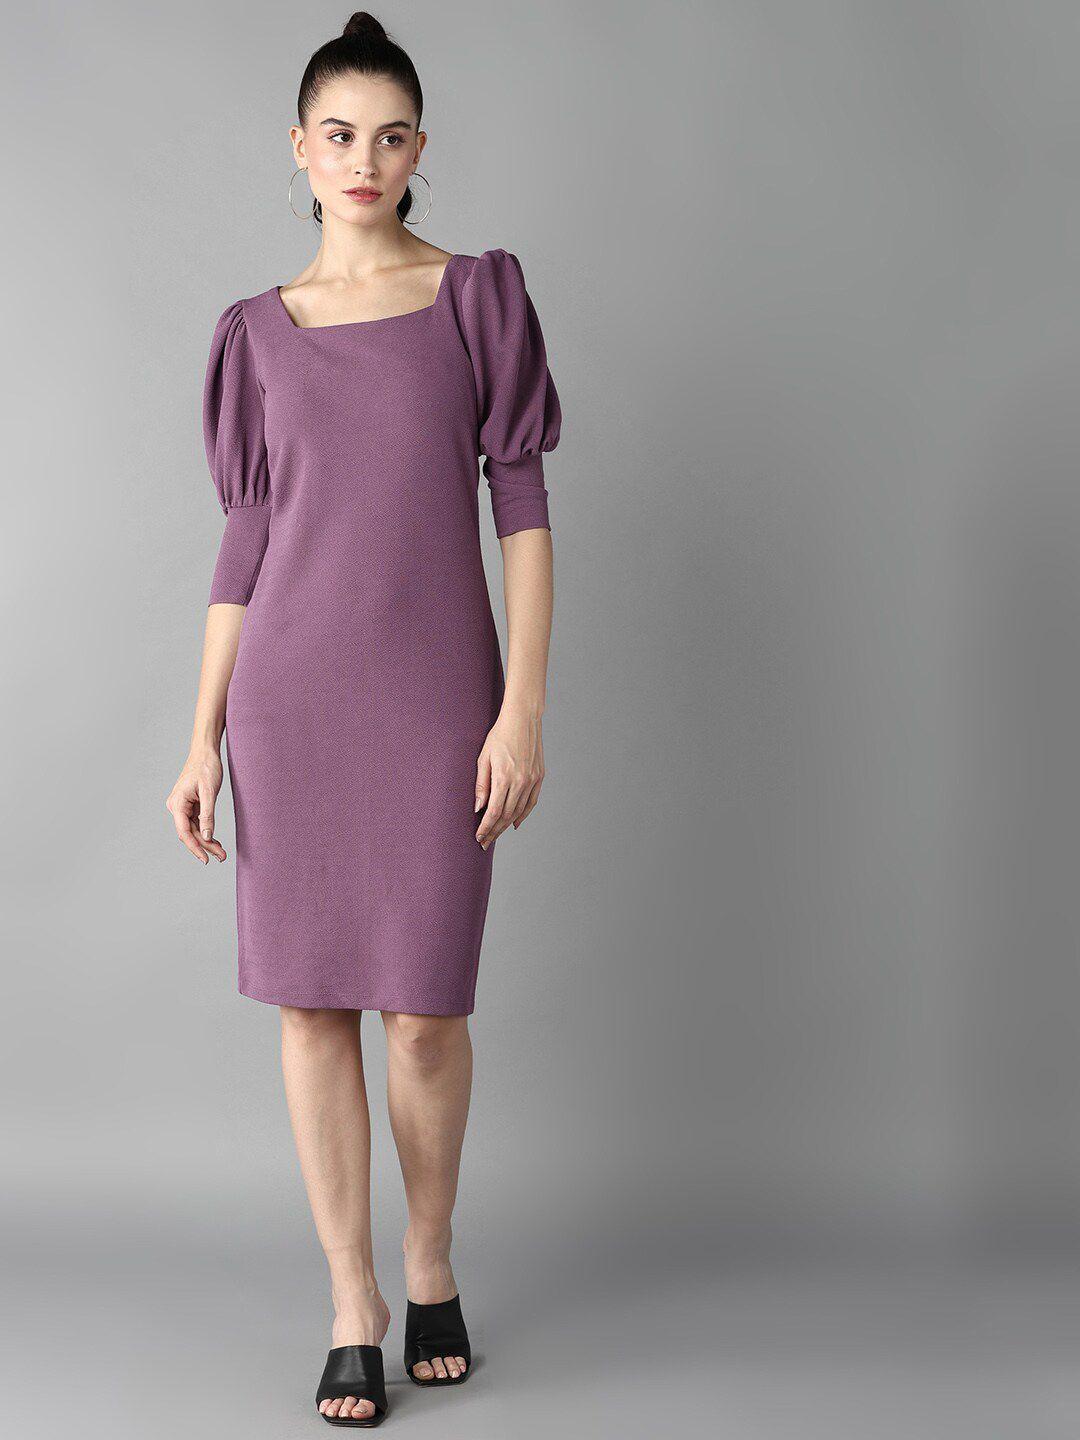 the roadster lifestyle co. purple square neck puff sleeves sheath dress